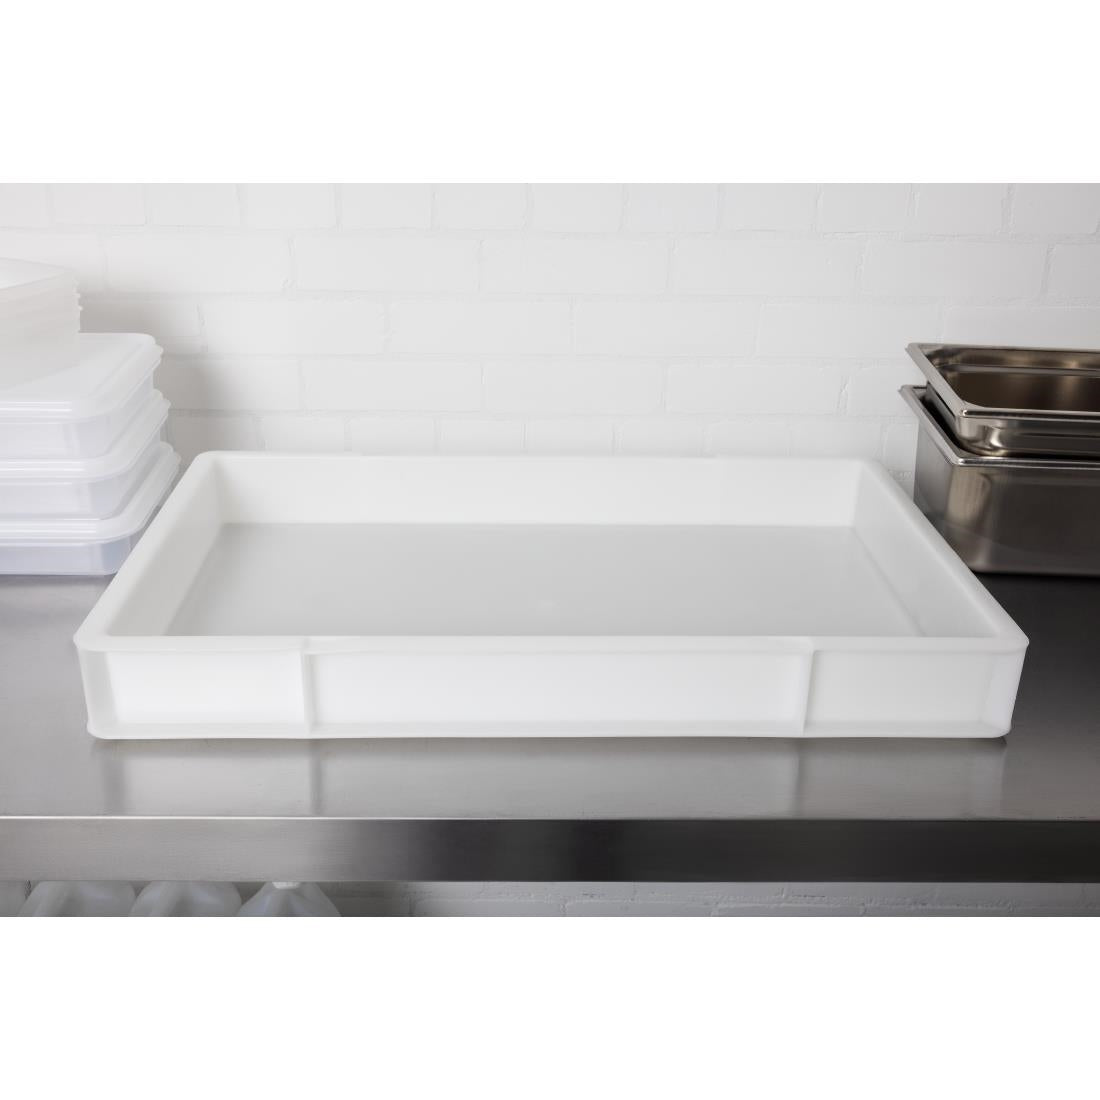 Confectionery Tray 22Ltr JD Catering Equipment Solutions Ltd